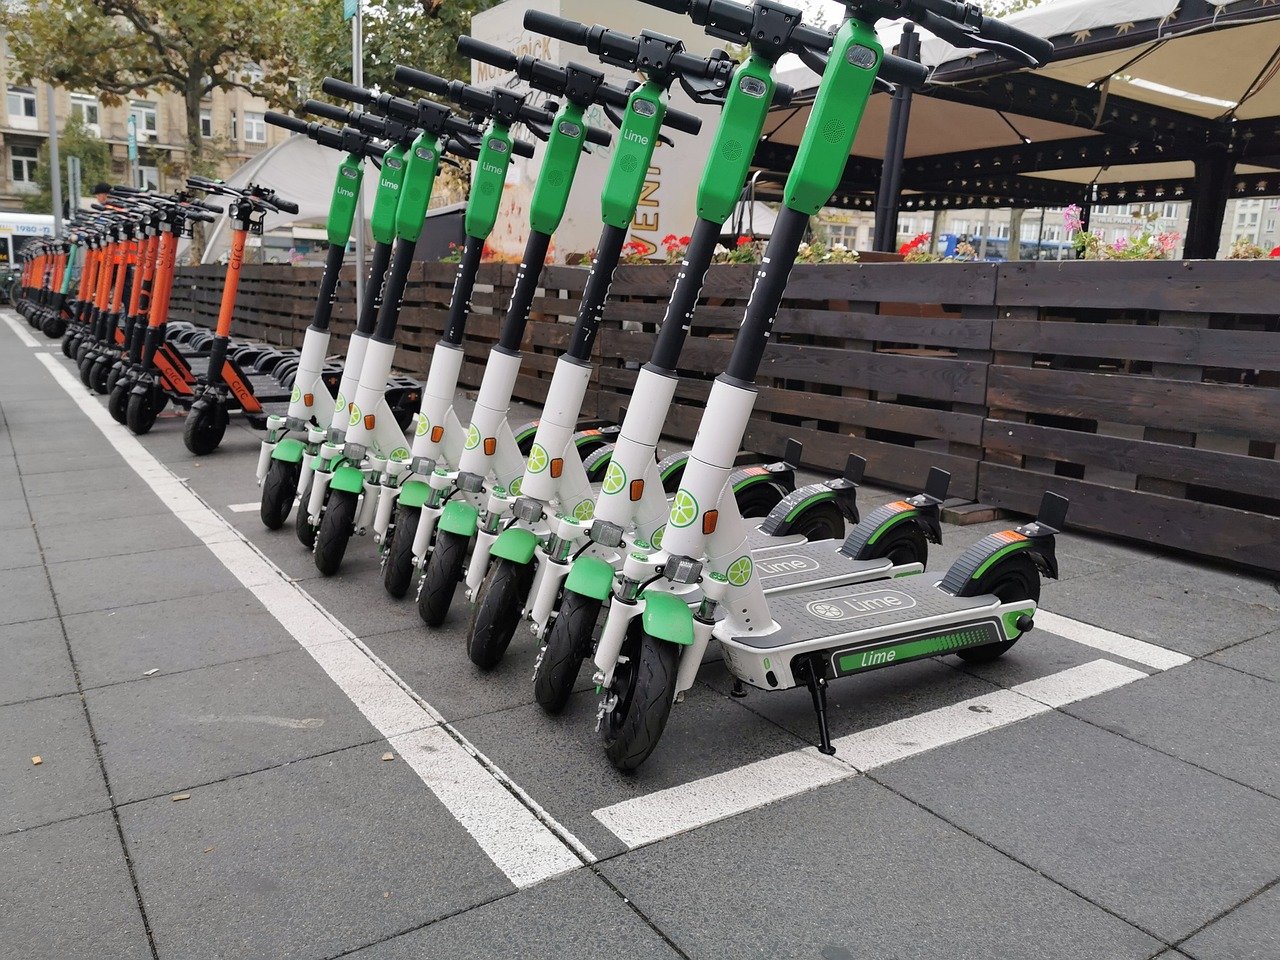 Where Is It Appropriate To Charge My Electric Scooter In Public, And How Should I Do It?